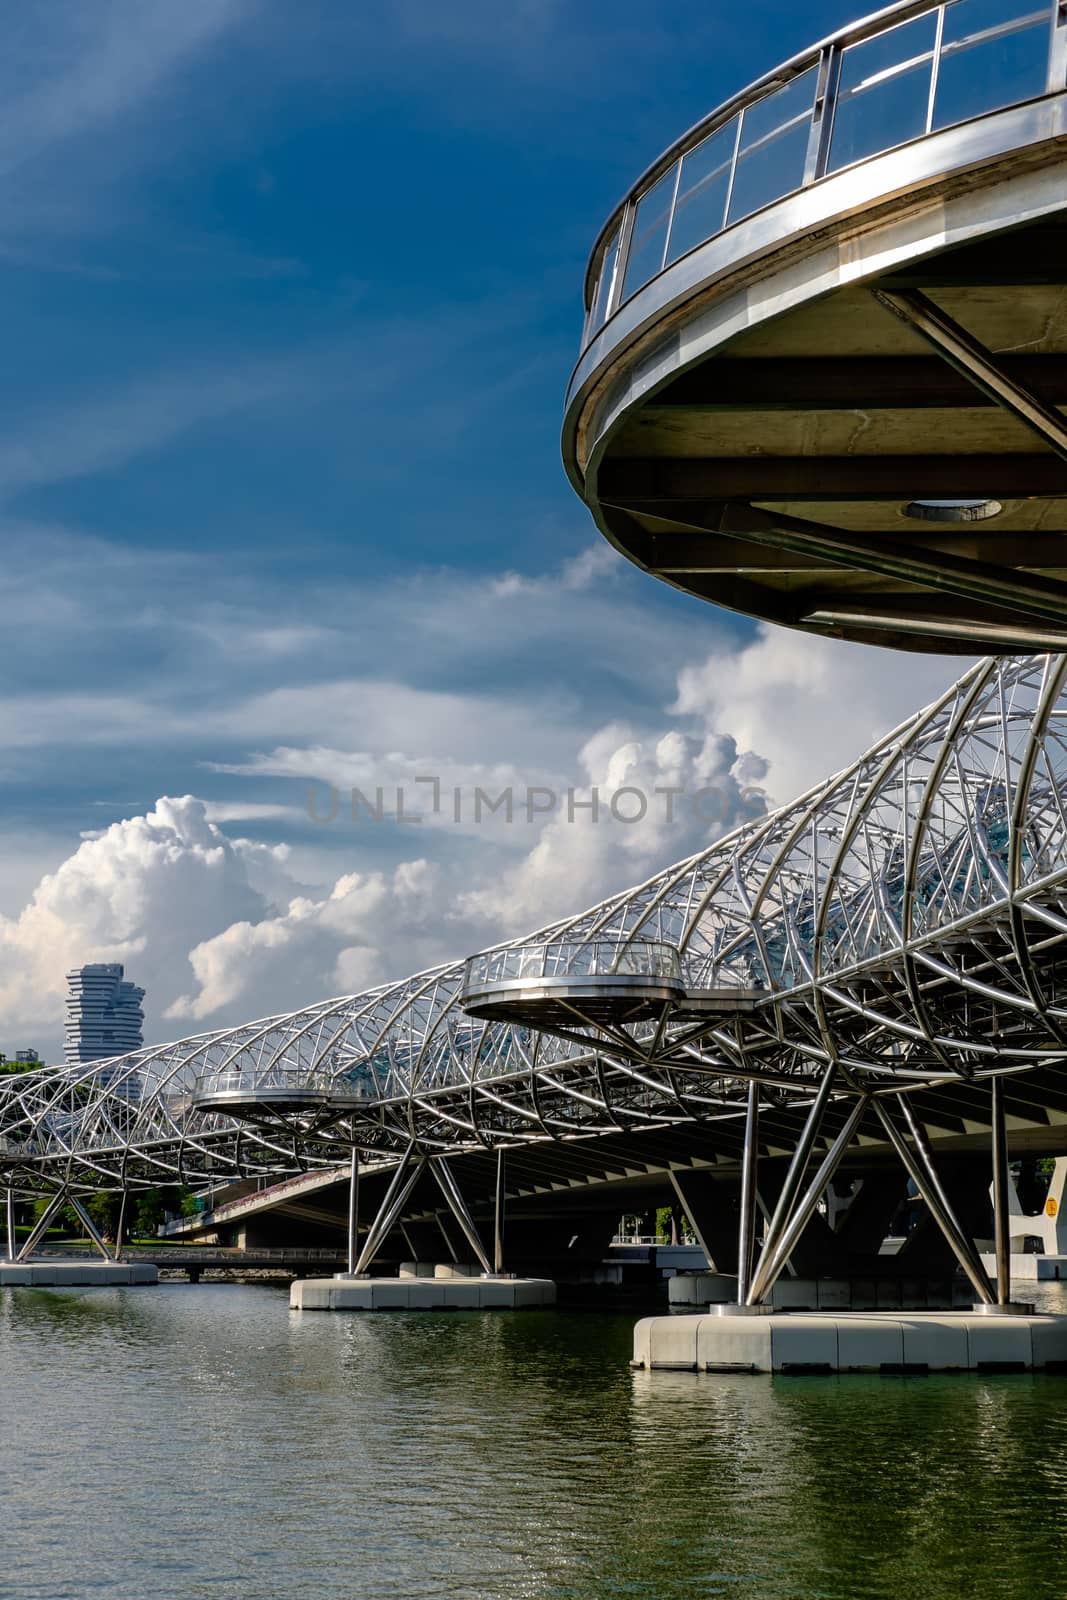 Helix Bridge at sunlight with clouds in the background in Singapore